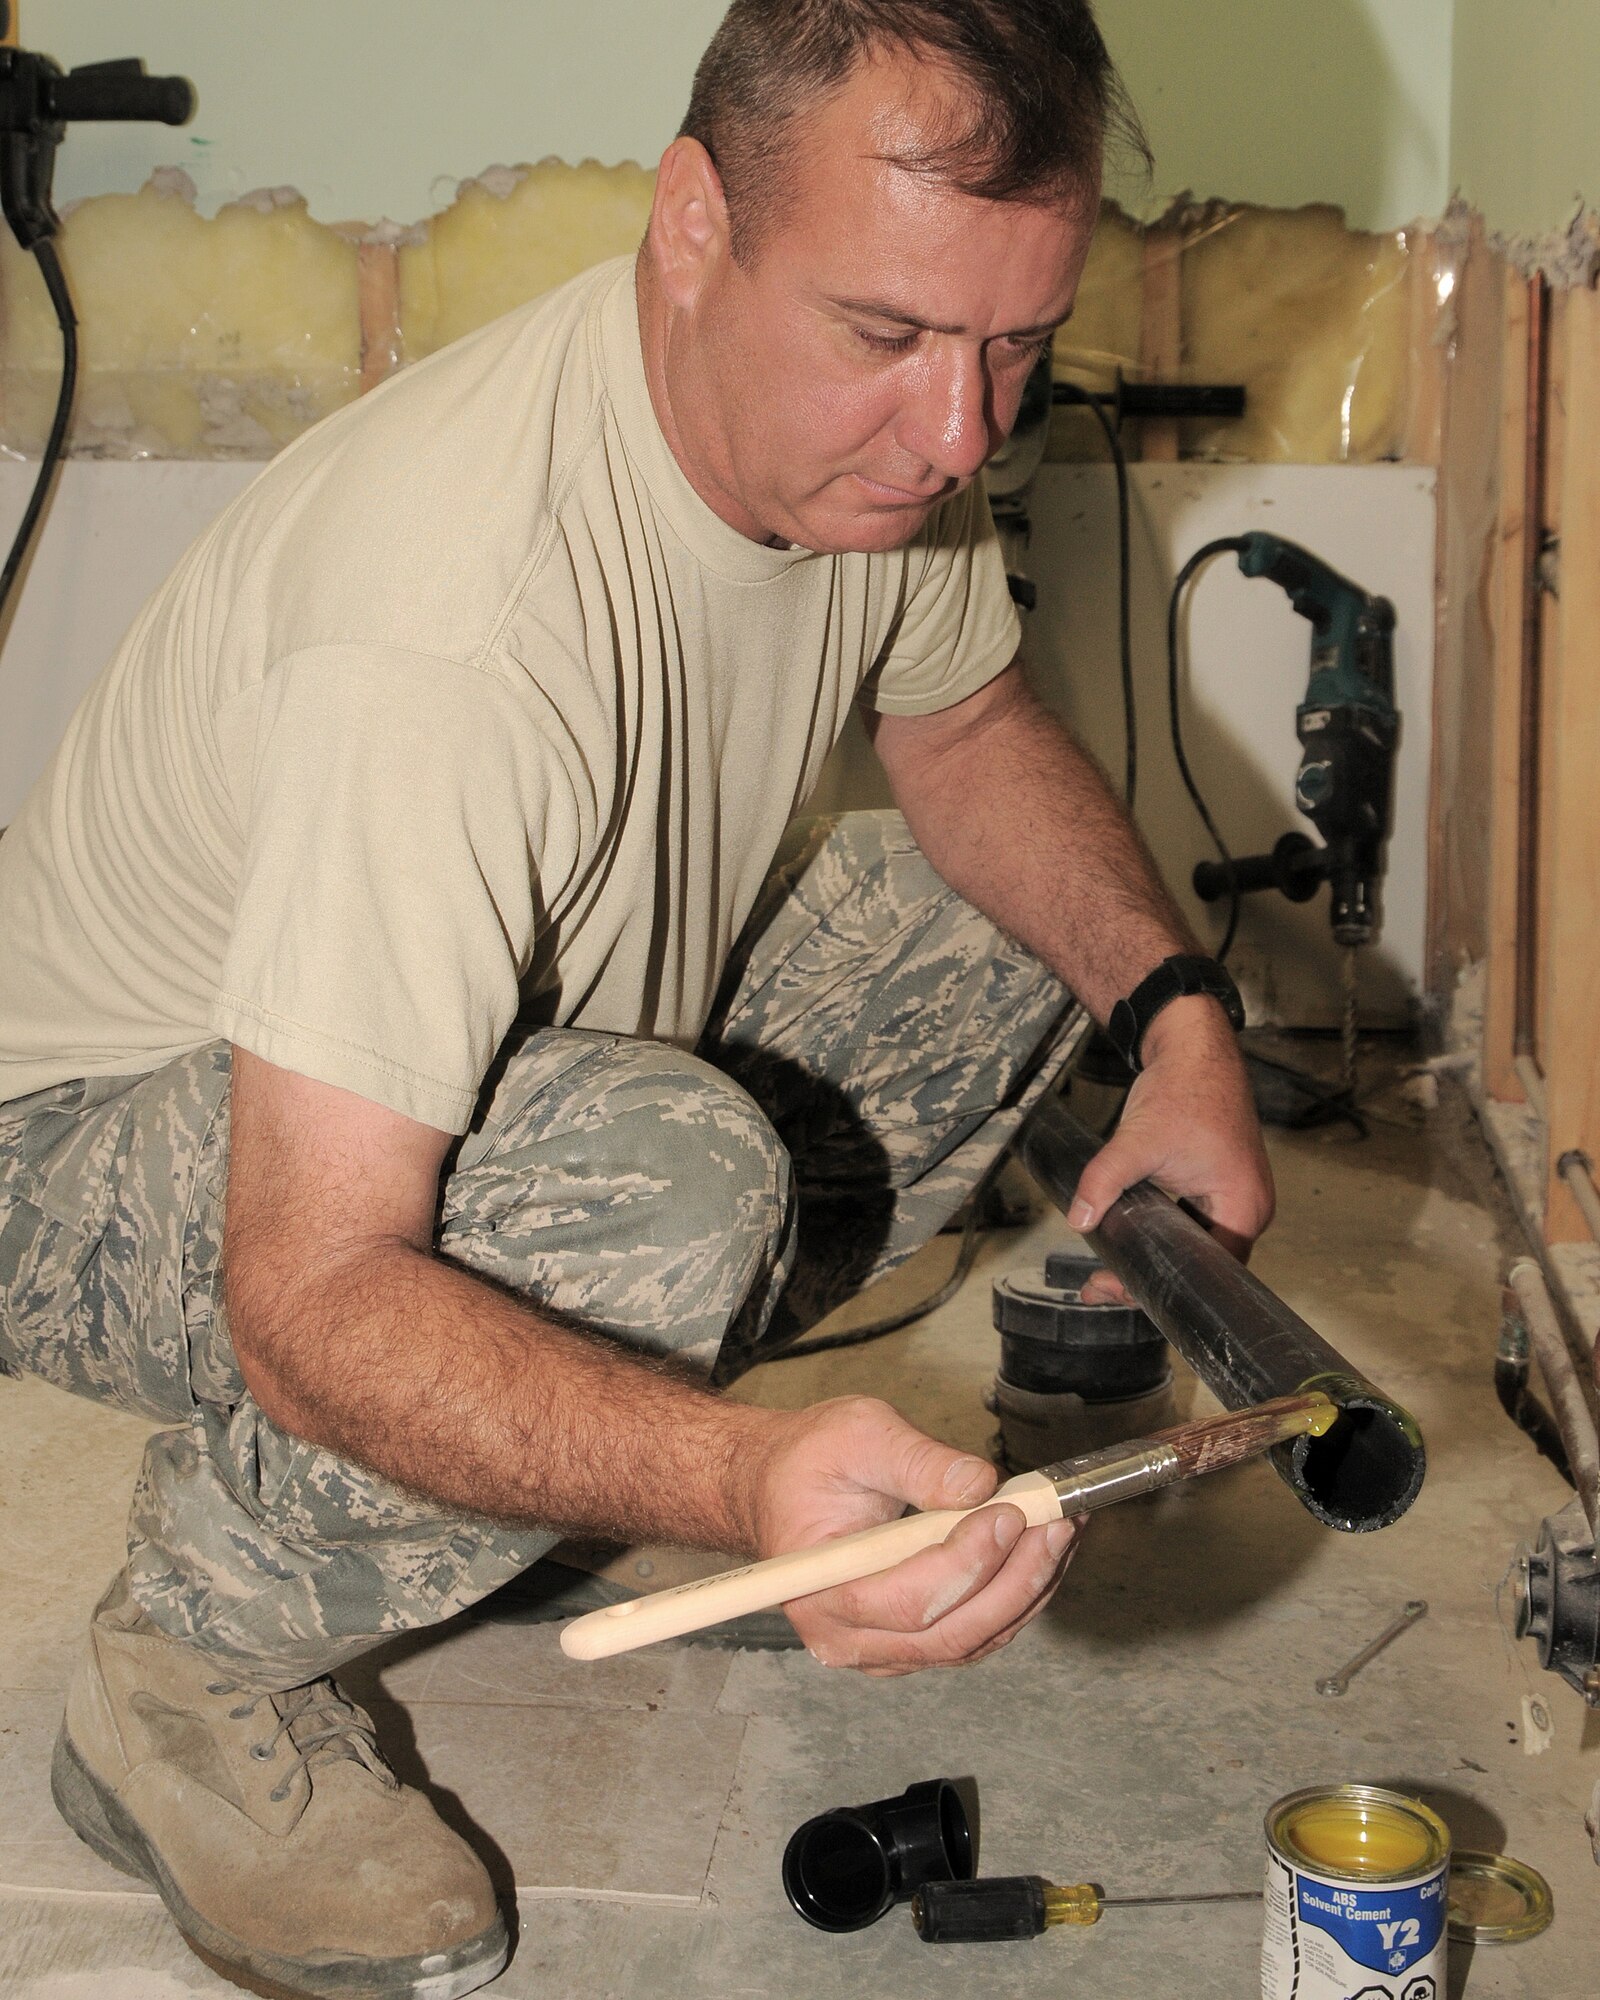 Tech. Sgt. Howard Alger prepares piping he will use to connect a sink to the main drainage line in a bathroom at the Canadian Forces base preschool in Cold Lake, Alberta The 146th Airlift Wing Civil Engineering Squadron, Channel Islands Air National Guard Station, Port Hueneme, Calif. performed their annual training at Canadian Forces Base, Cold Lake, Alberta, Canada July 28-Aug. 11, 2012, taking on several ventures, including a renovation at a children’s day care center and a grading project for a concrete storage compound to support sea containers. (U.S. Air Force photo by Tech. Sgt. Alex Koenig)